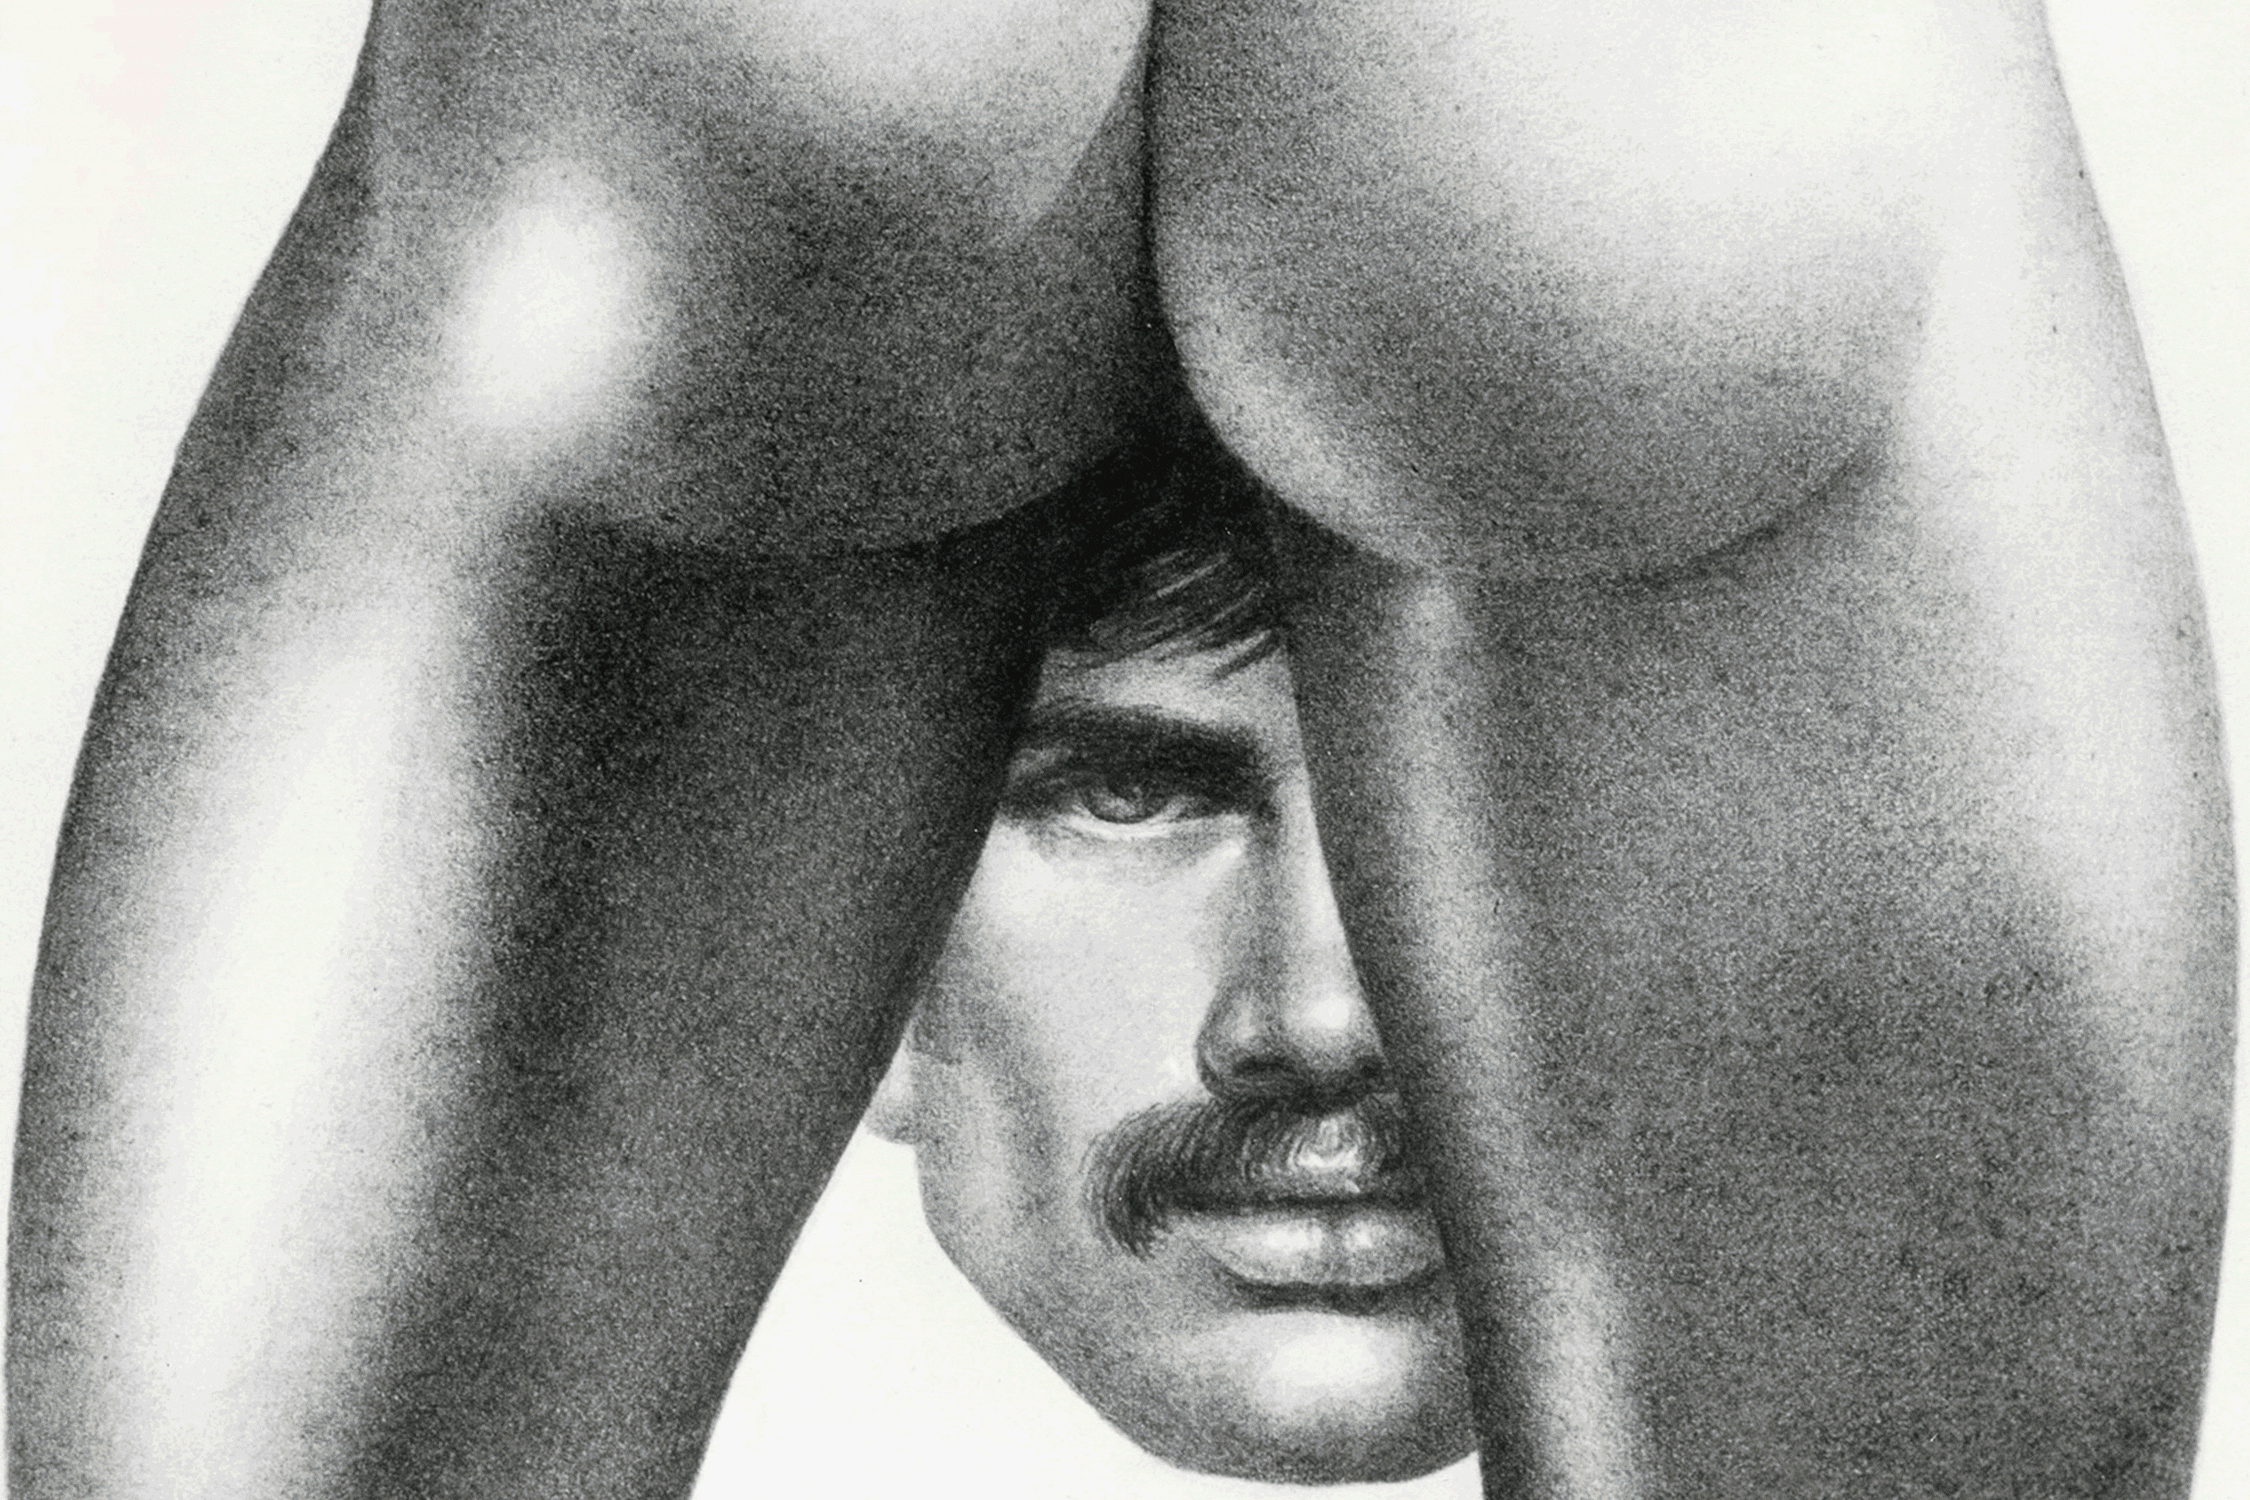 A GIF file showing two artworks; the first is a black and white pencil drawing by Tom of Finland depicting a moustache man peering between the muscular buttocks of another man. The second image is a colourful painting by Beryl Cook depicting a tanned full-bodied women wearing a revealing leopard print jump suit.